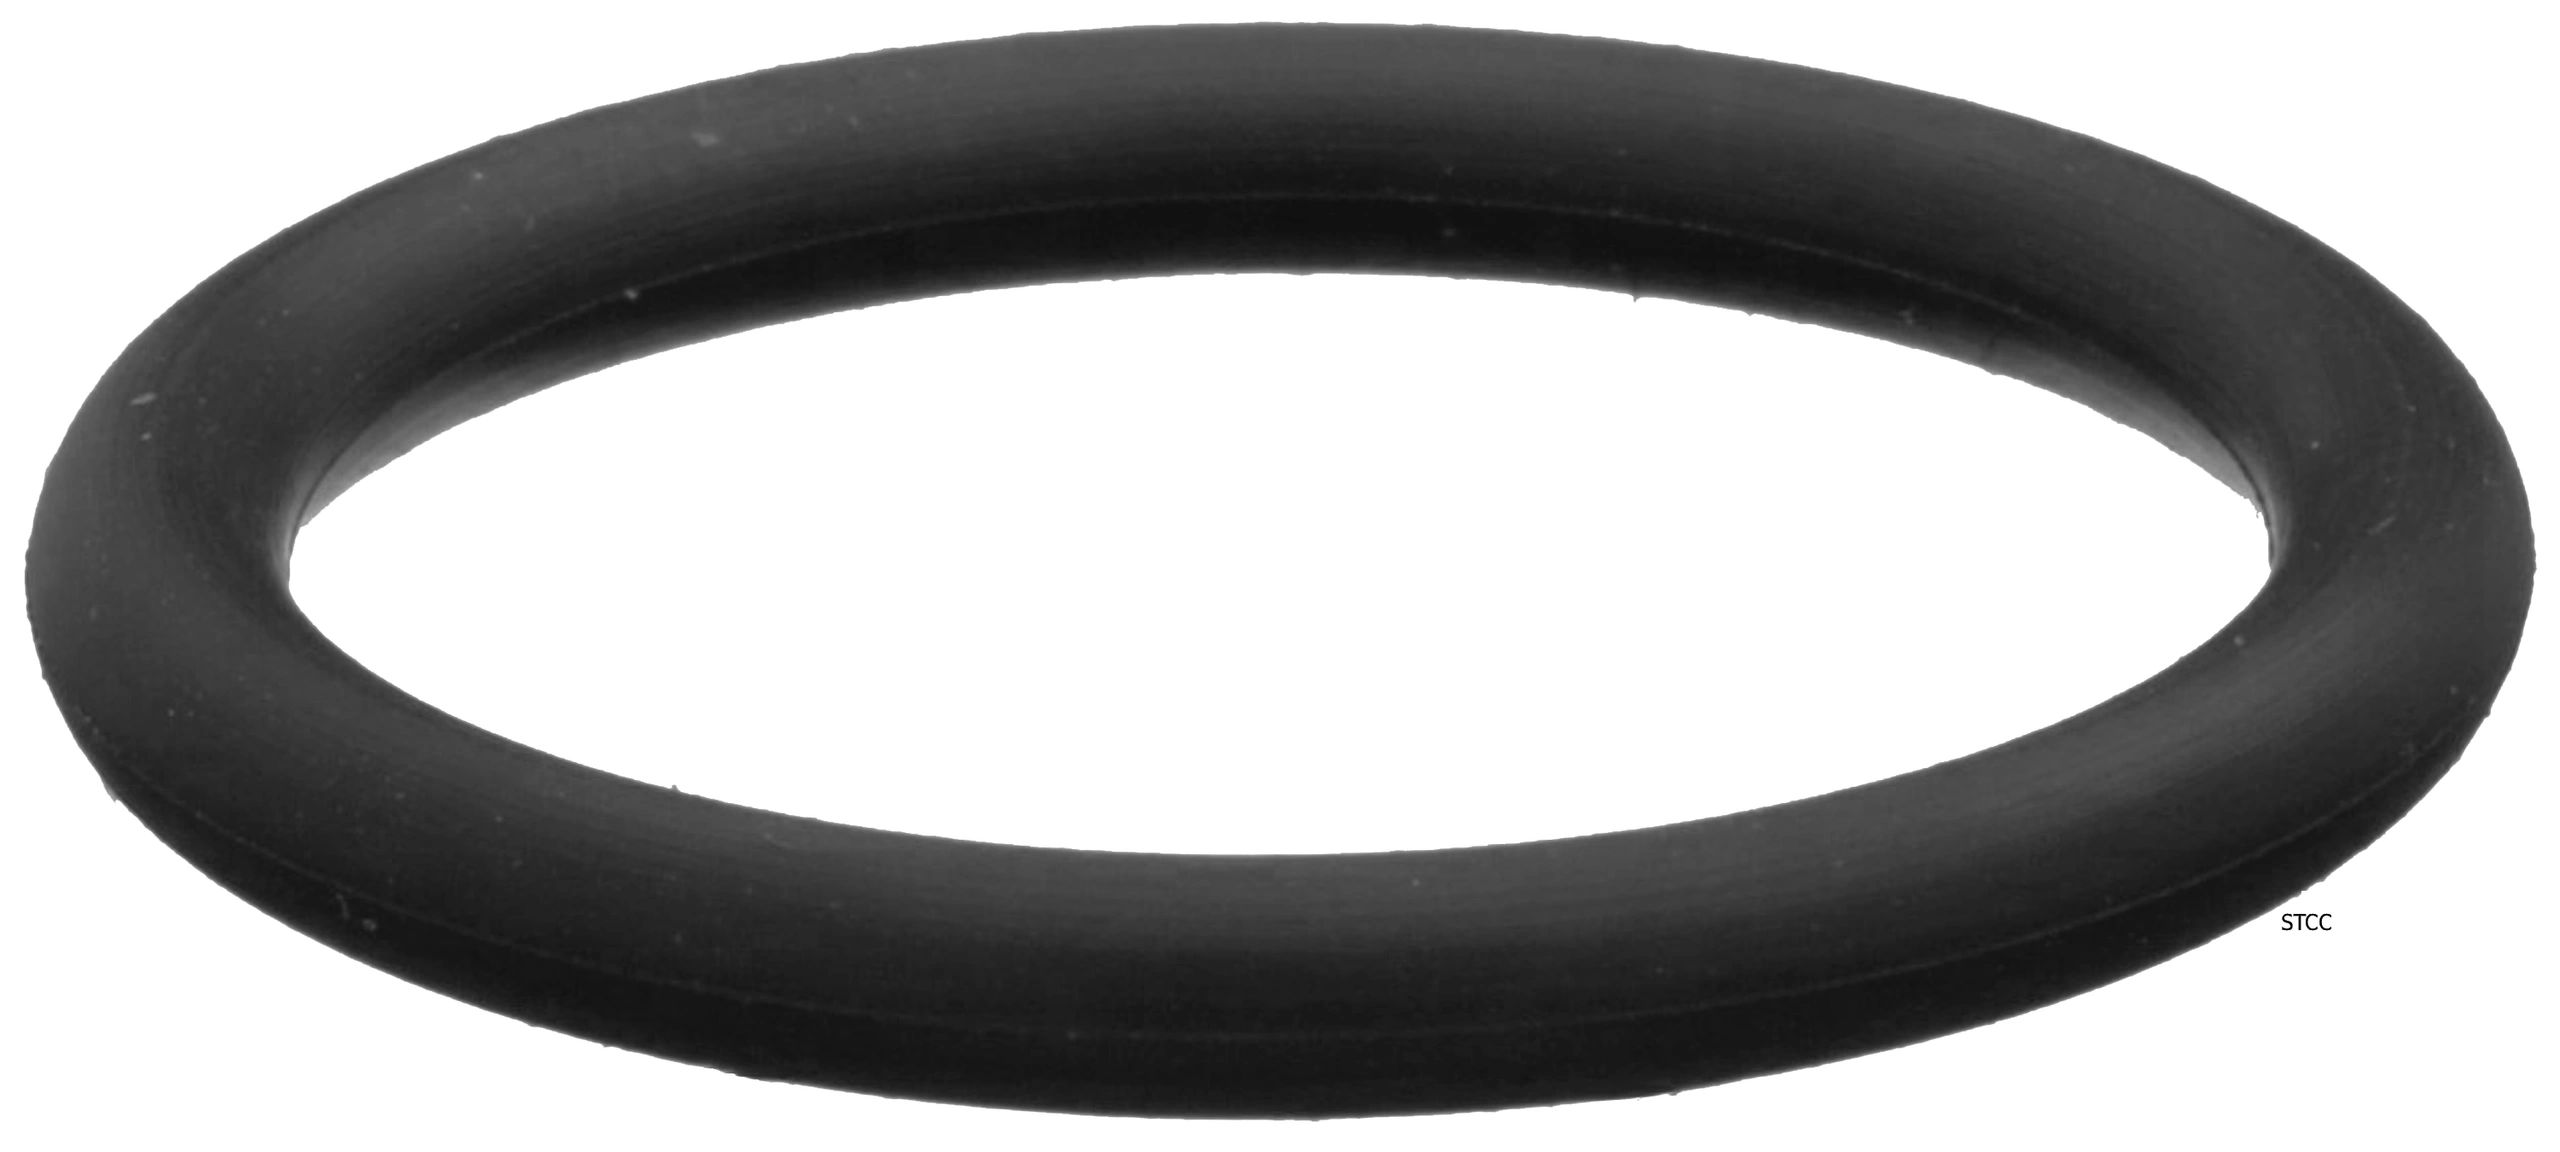 2-3/8 ID 3-1/2 OD Pack of 25 Sur-Seal 3-1/2 OD 2-3/8 ID Sterling Seal ORTFE036x25 Number-036 Standard Teflon O-Ring Outstanding Weather Resistance Polytetrafluoro-Ethylene Pack of 25 